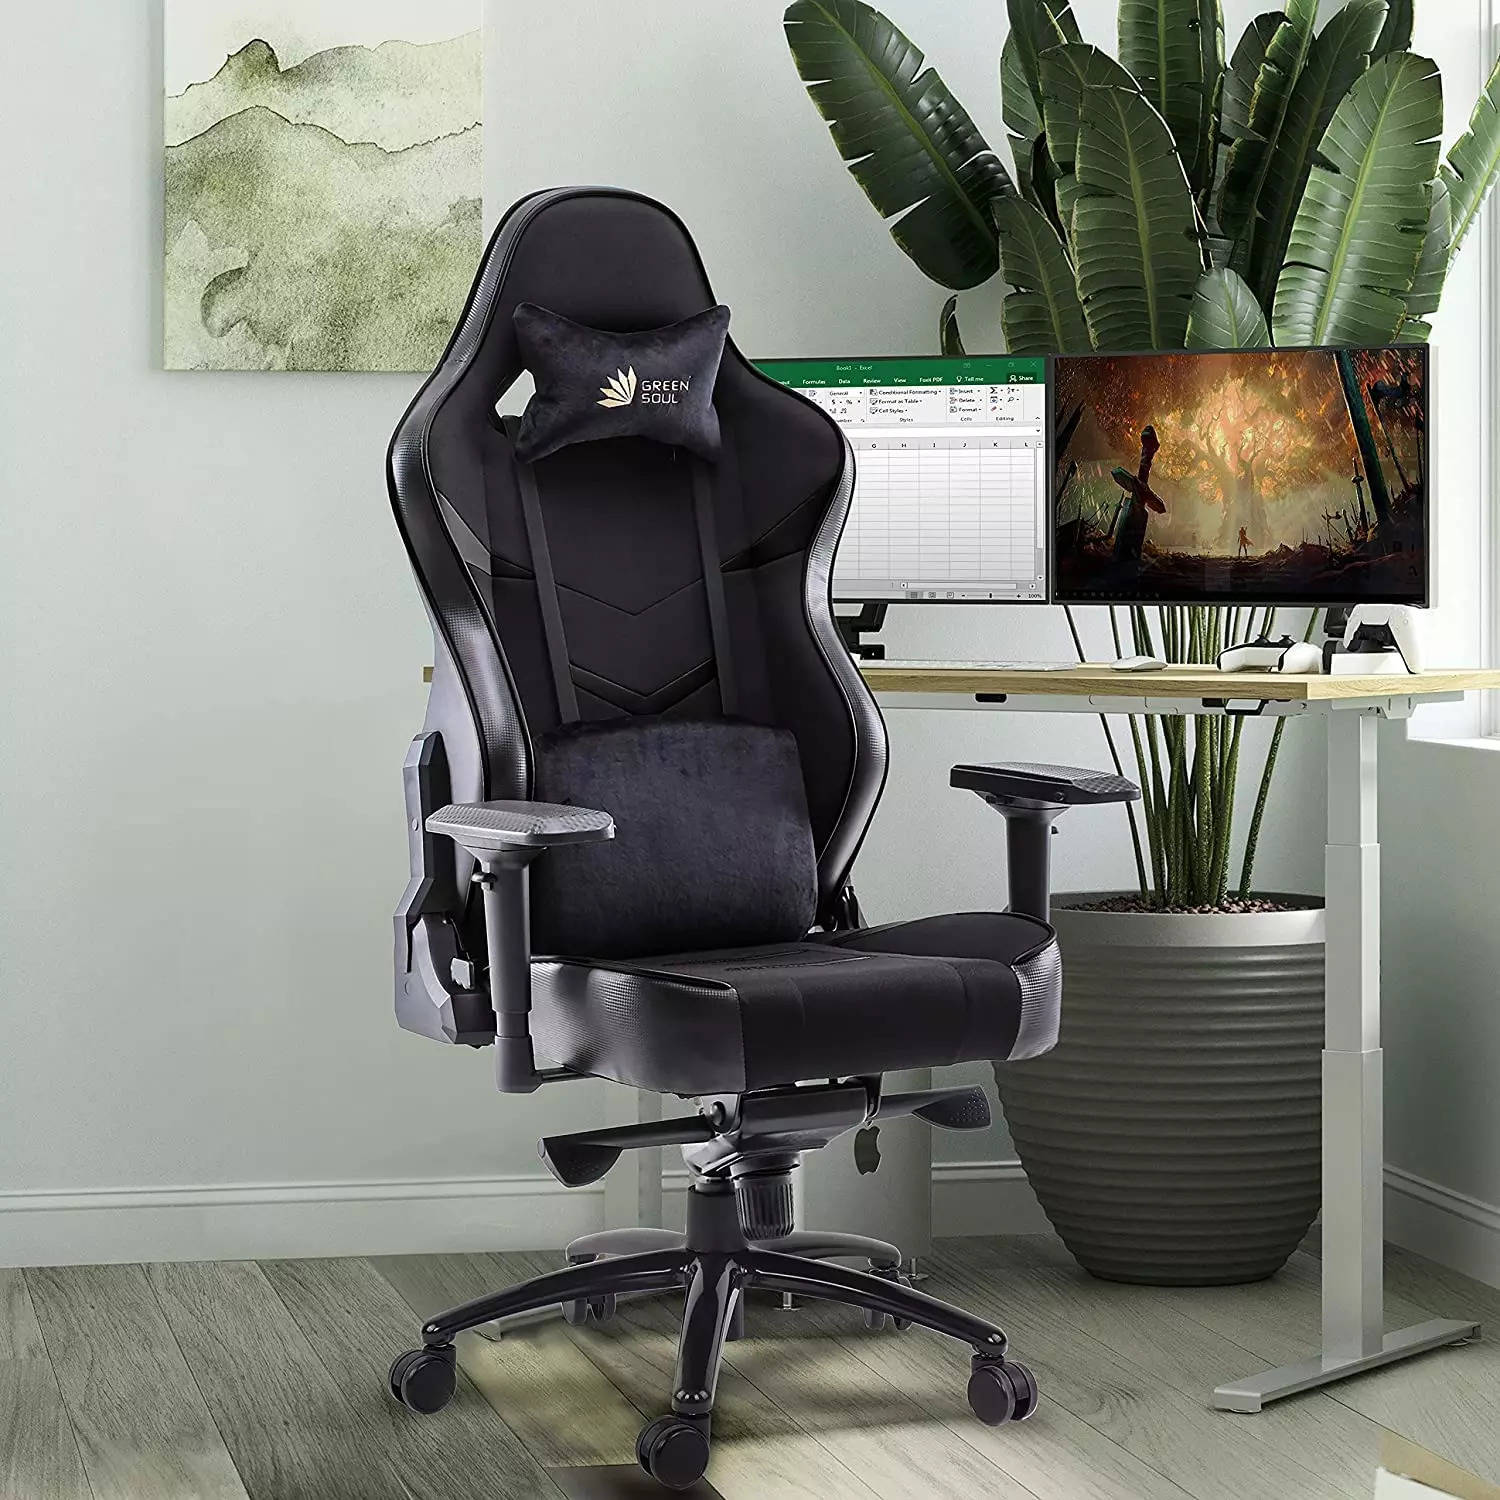 soul gaming chairs: Discover the Top Green Soul Gaming for Online Avid Gamers! - The Economic Times